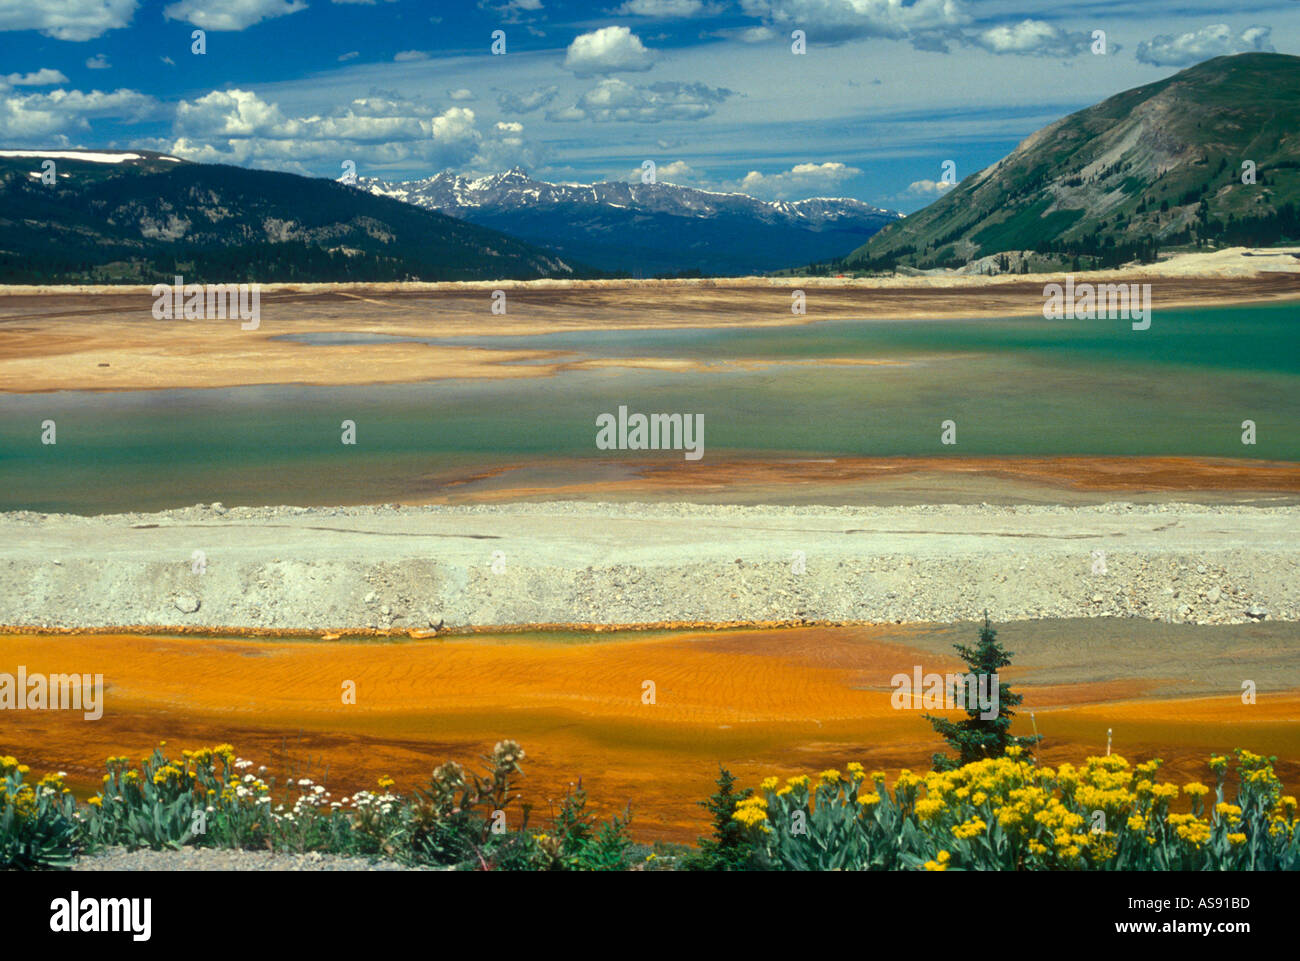 Climax Colorado The tailings ponds at the Climax Molybdenum mine with snow capped Rocky Mountains in the background Stock Photo